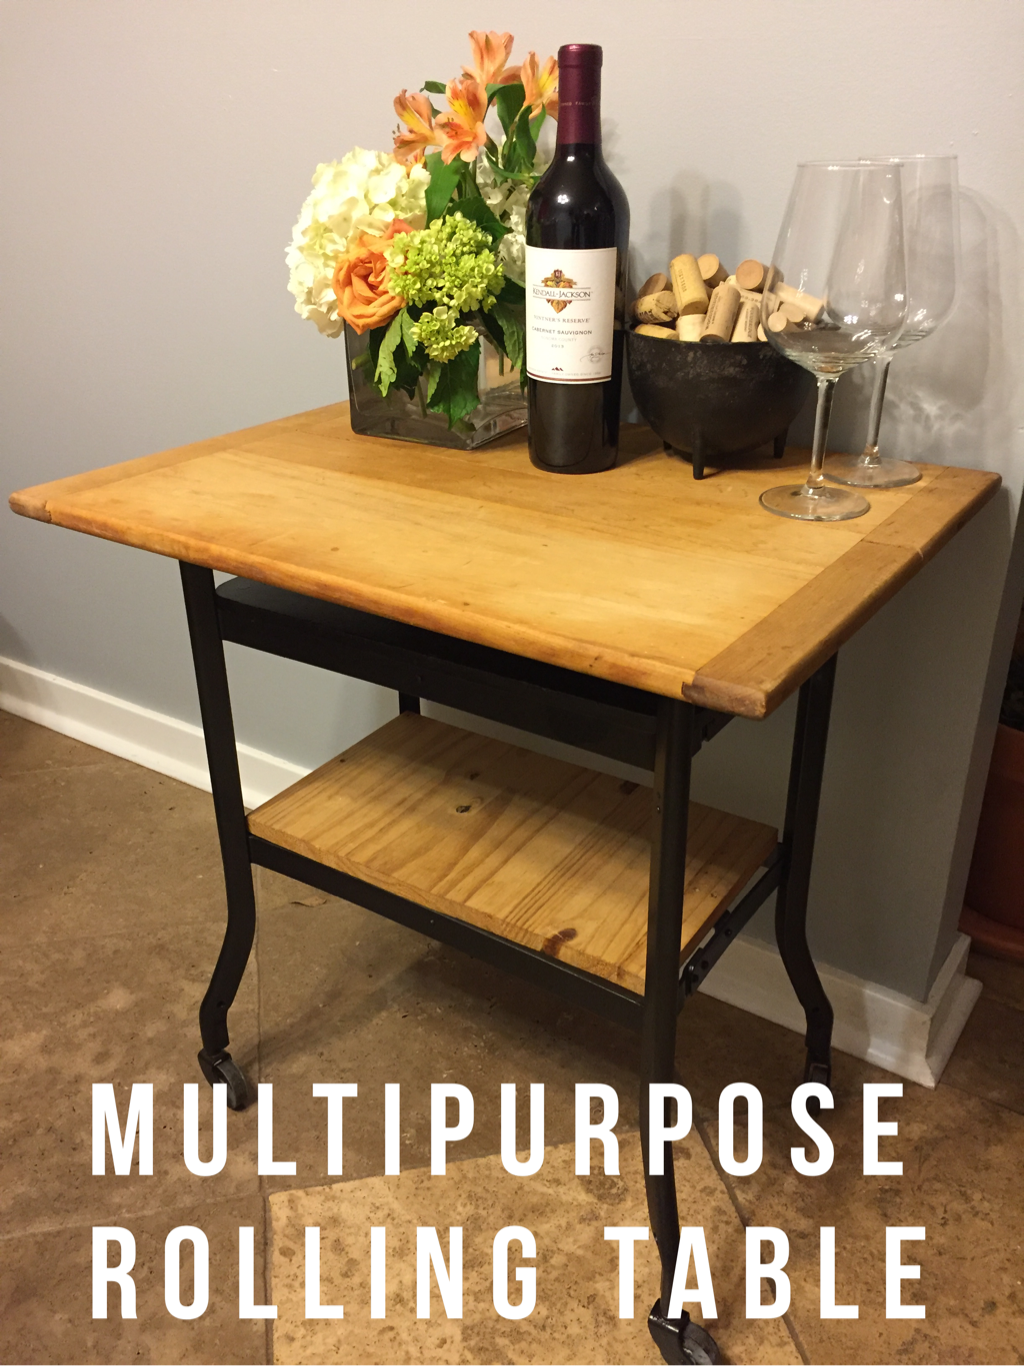 How to turn an old rolling cart into a multipurpose table.